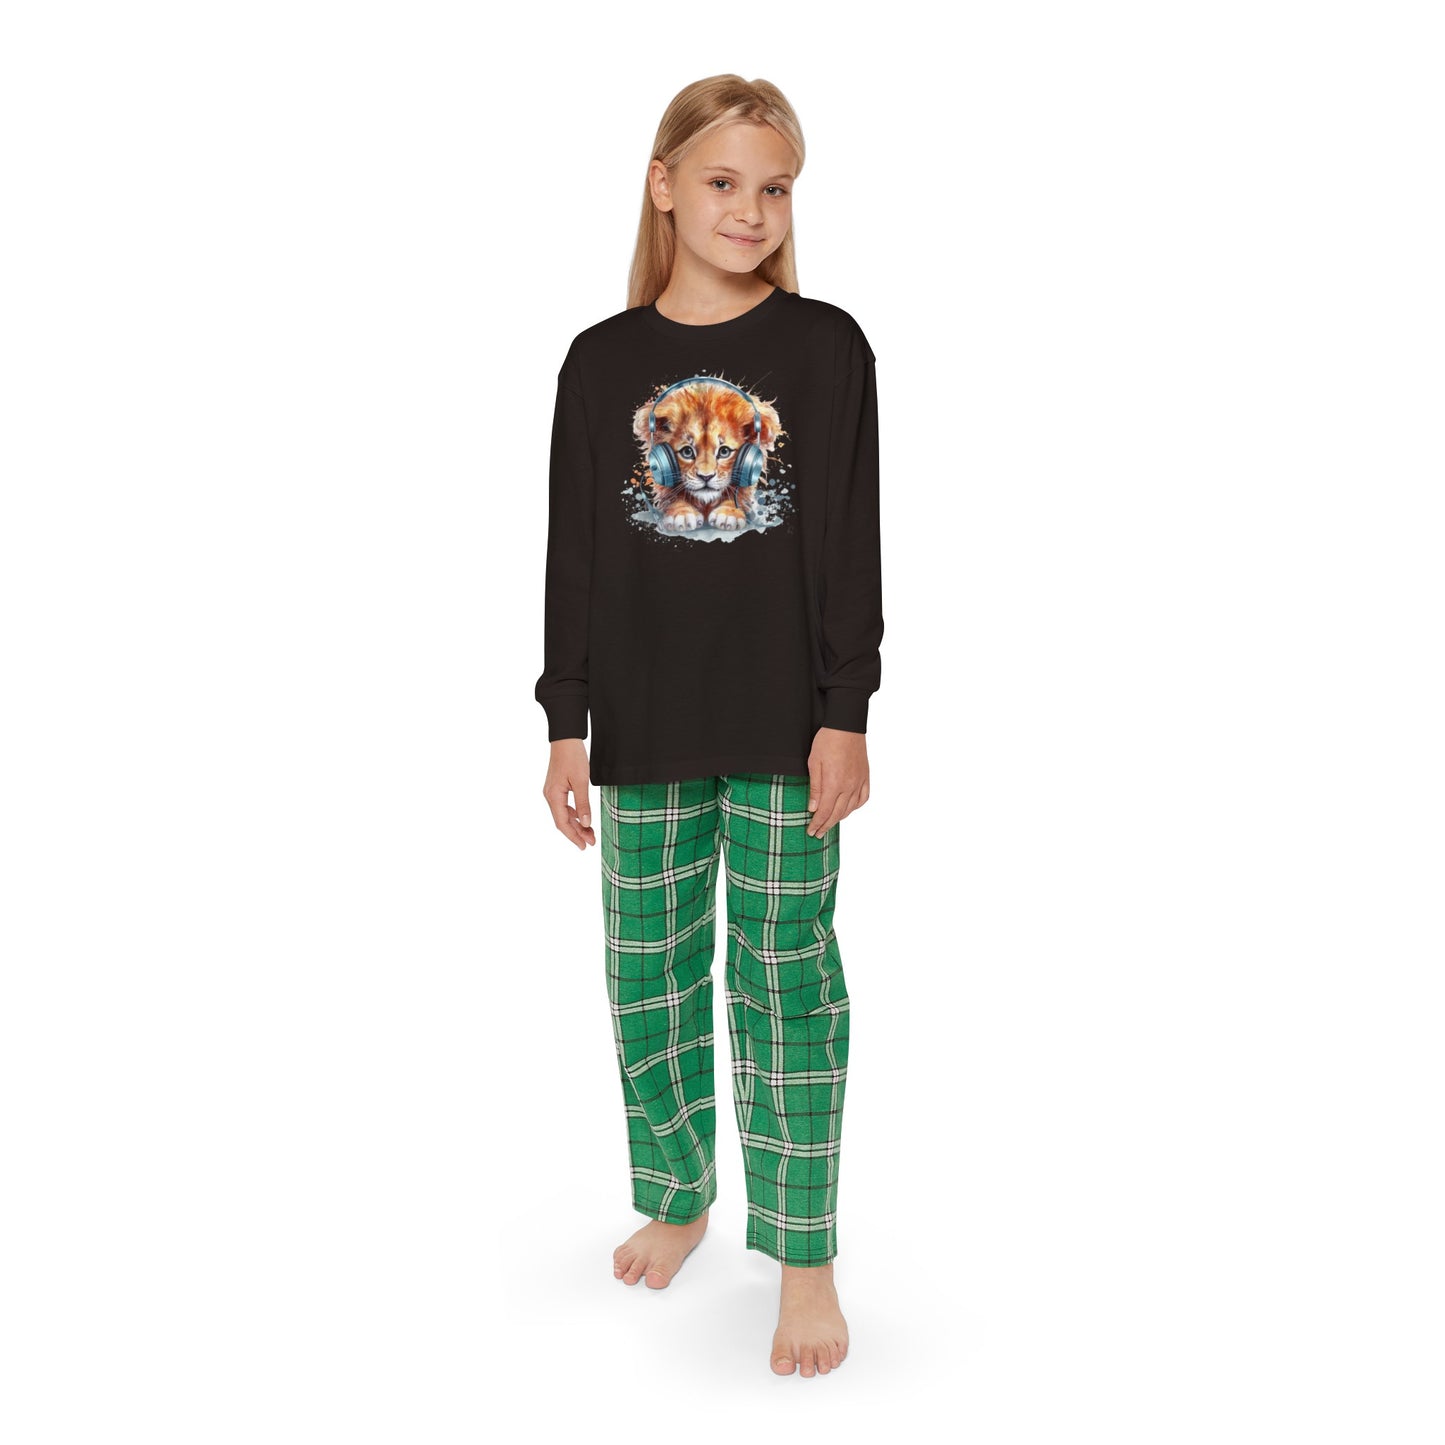 Youth Long Sleeve Holiday Outfit Set